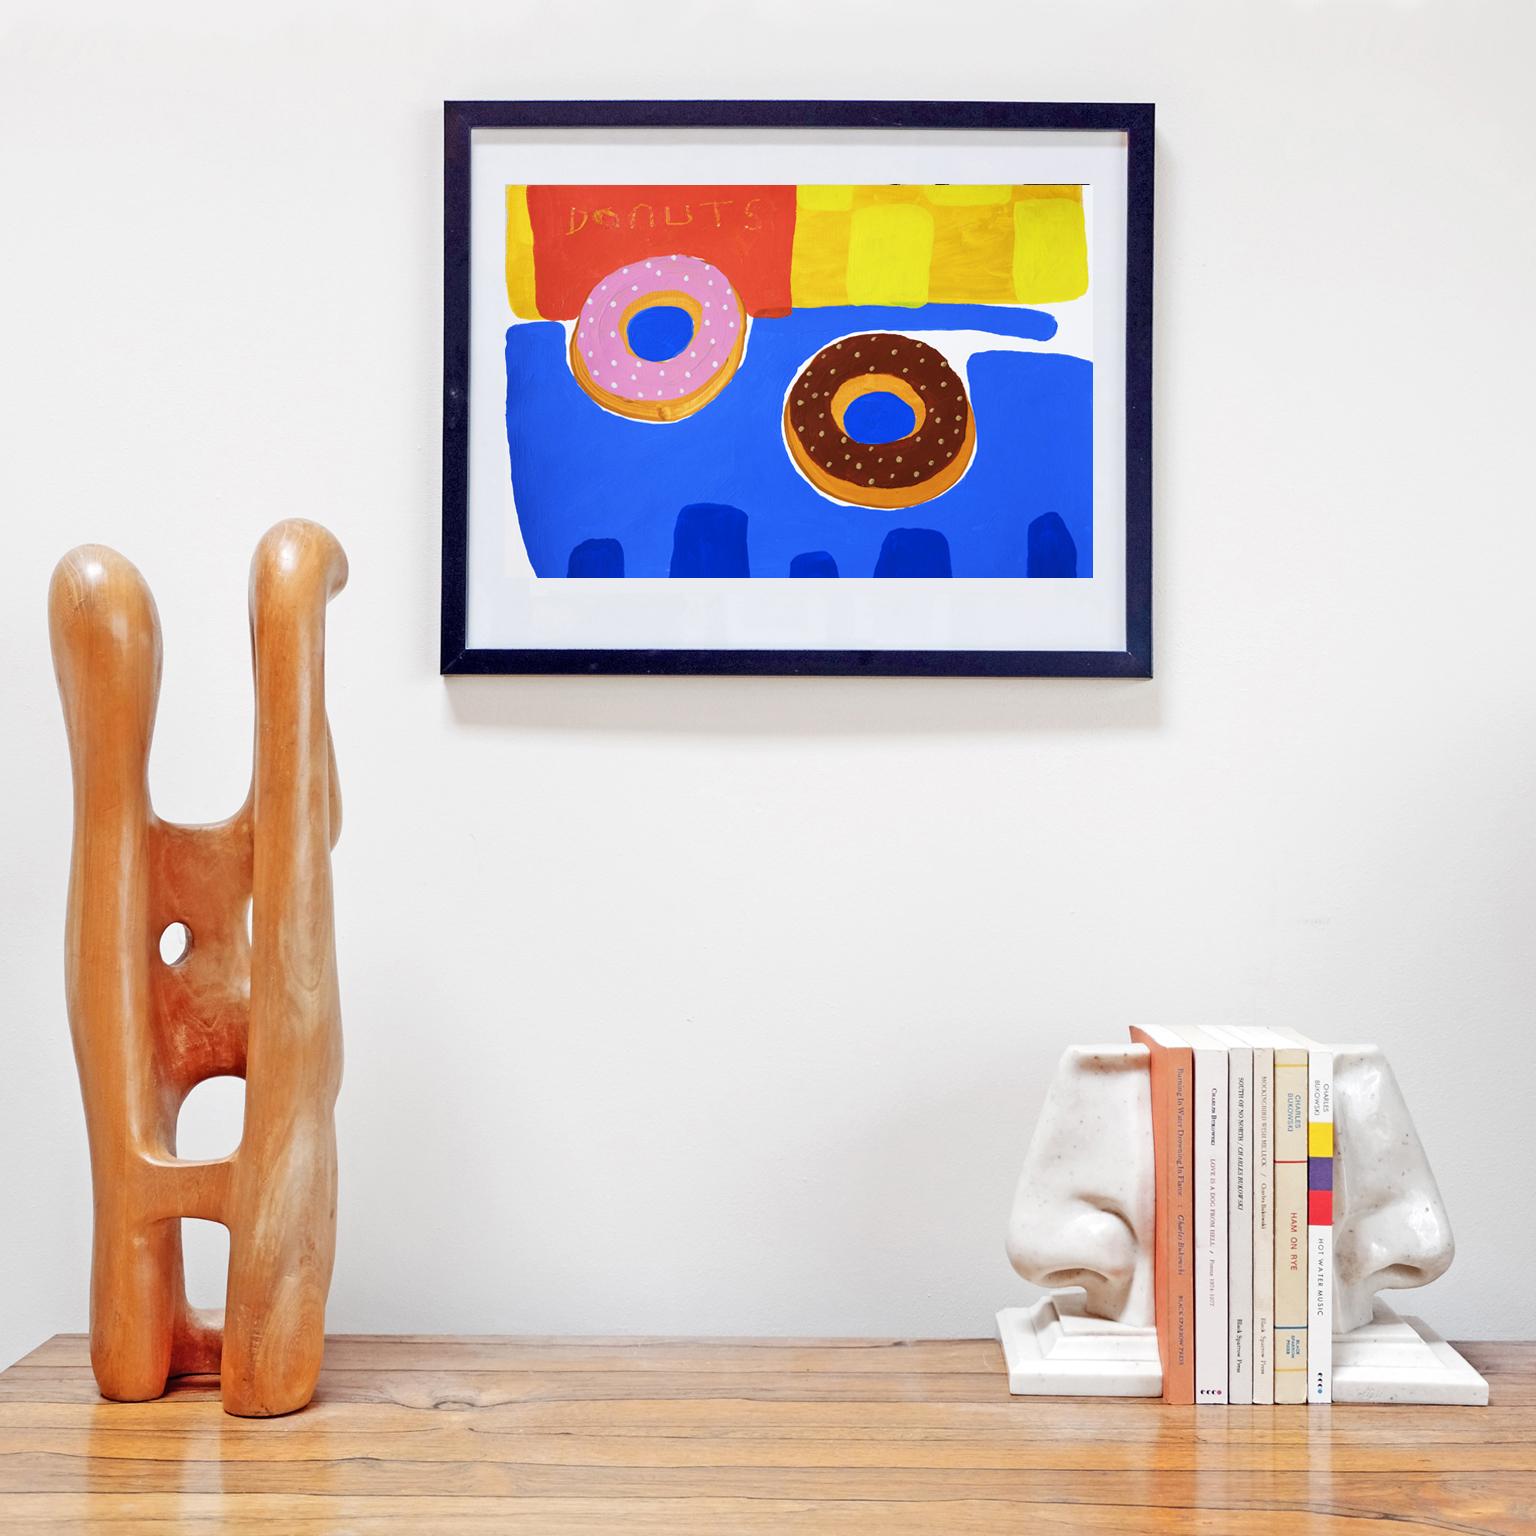 English 'One of Each' Painting by Alan Fears Acrylic on Paper Pop Art Still Life